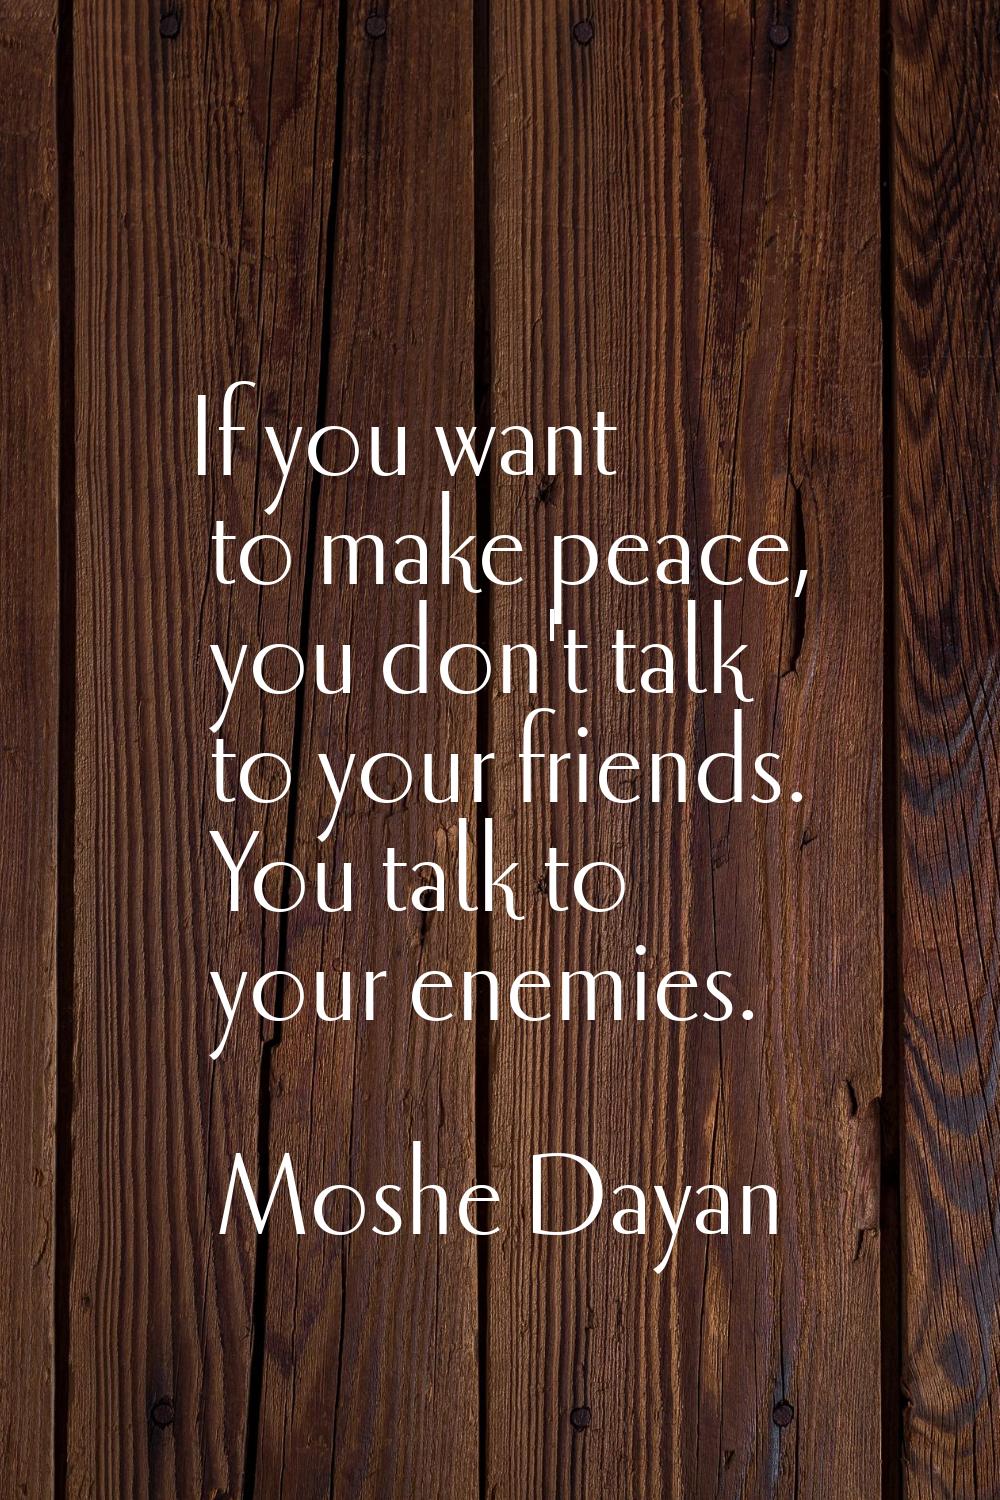 If you want to make peace, you don't talk to your friends. You talk to your enemies.